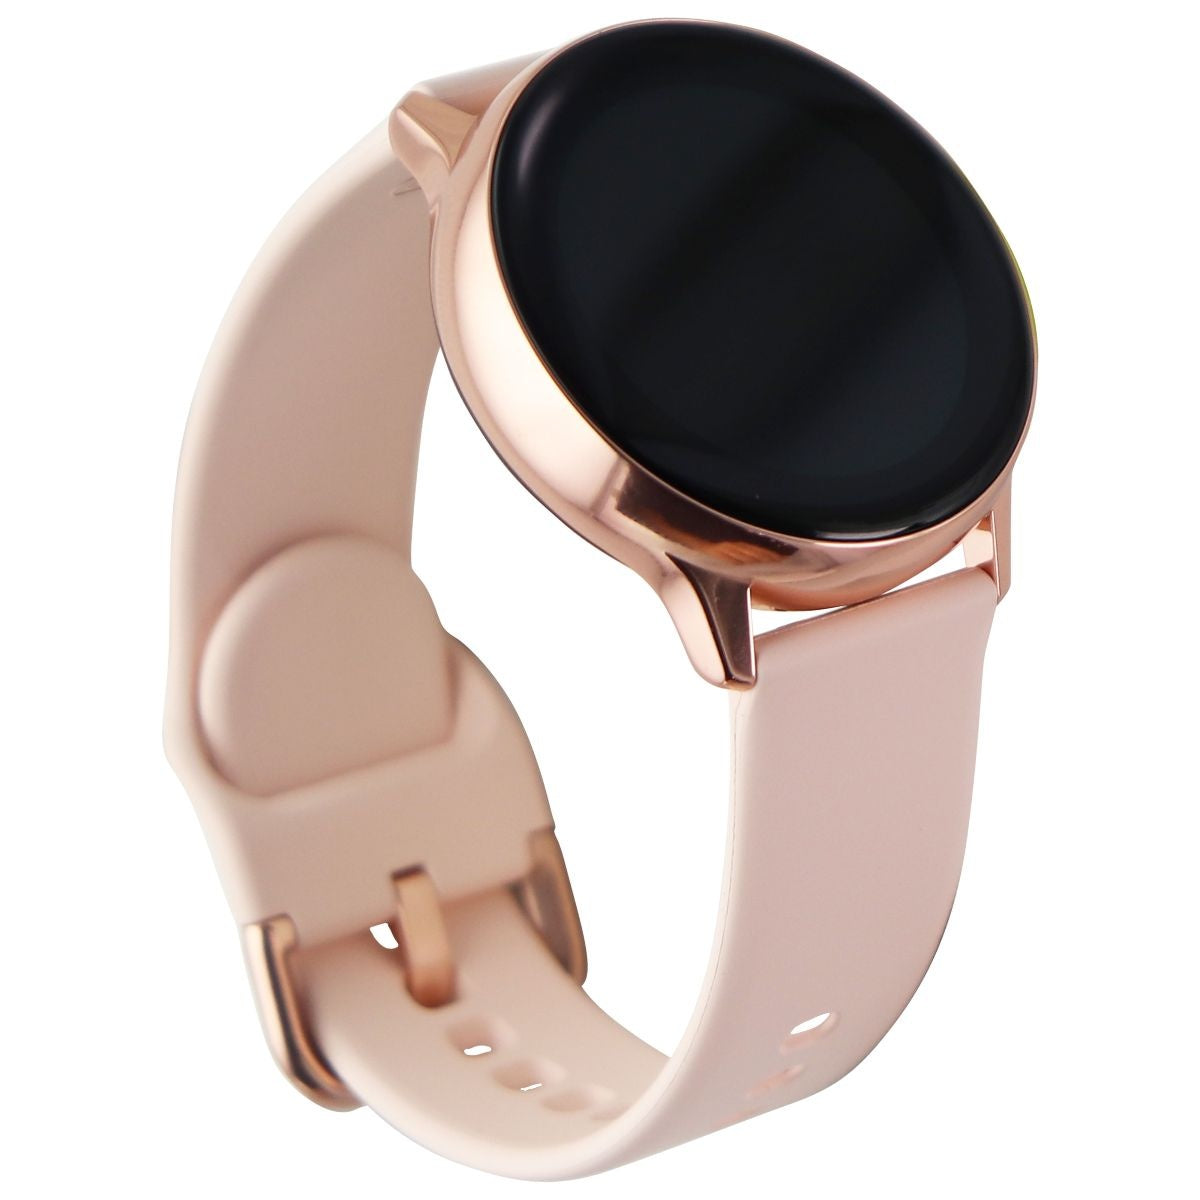 Samsung Galaxy Watch Active (1st Gen, 40mm) Bluetooth Only - Rose Gold (SM-R500) Smart Watches Samsung    - Simple Cell Bulk Wholesale Pricing - USA Seller